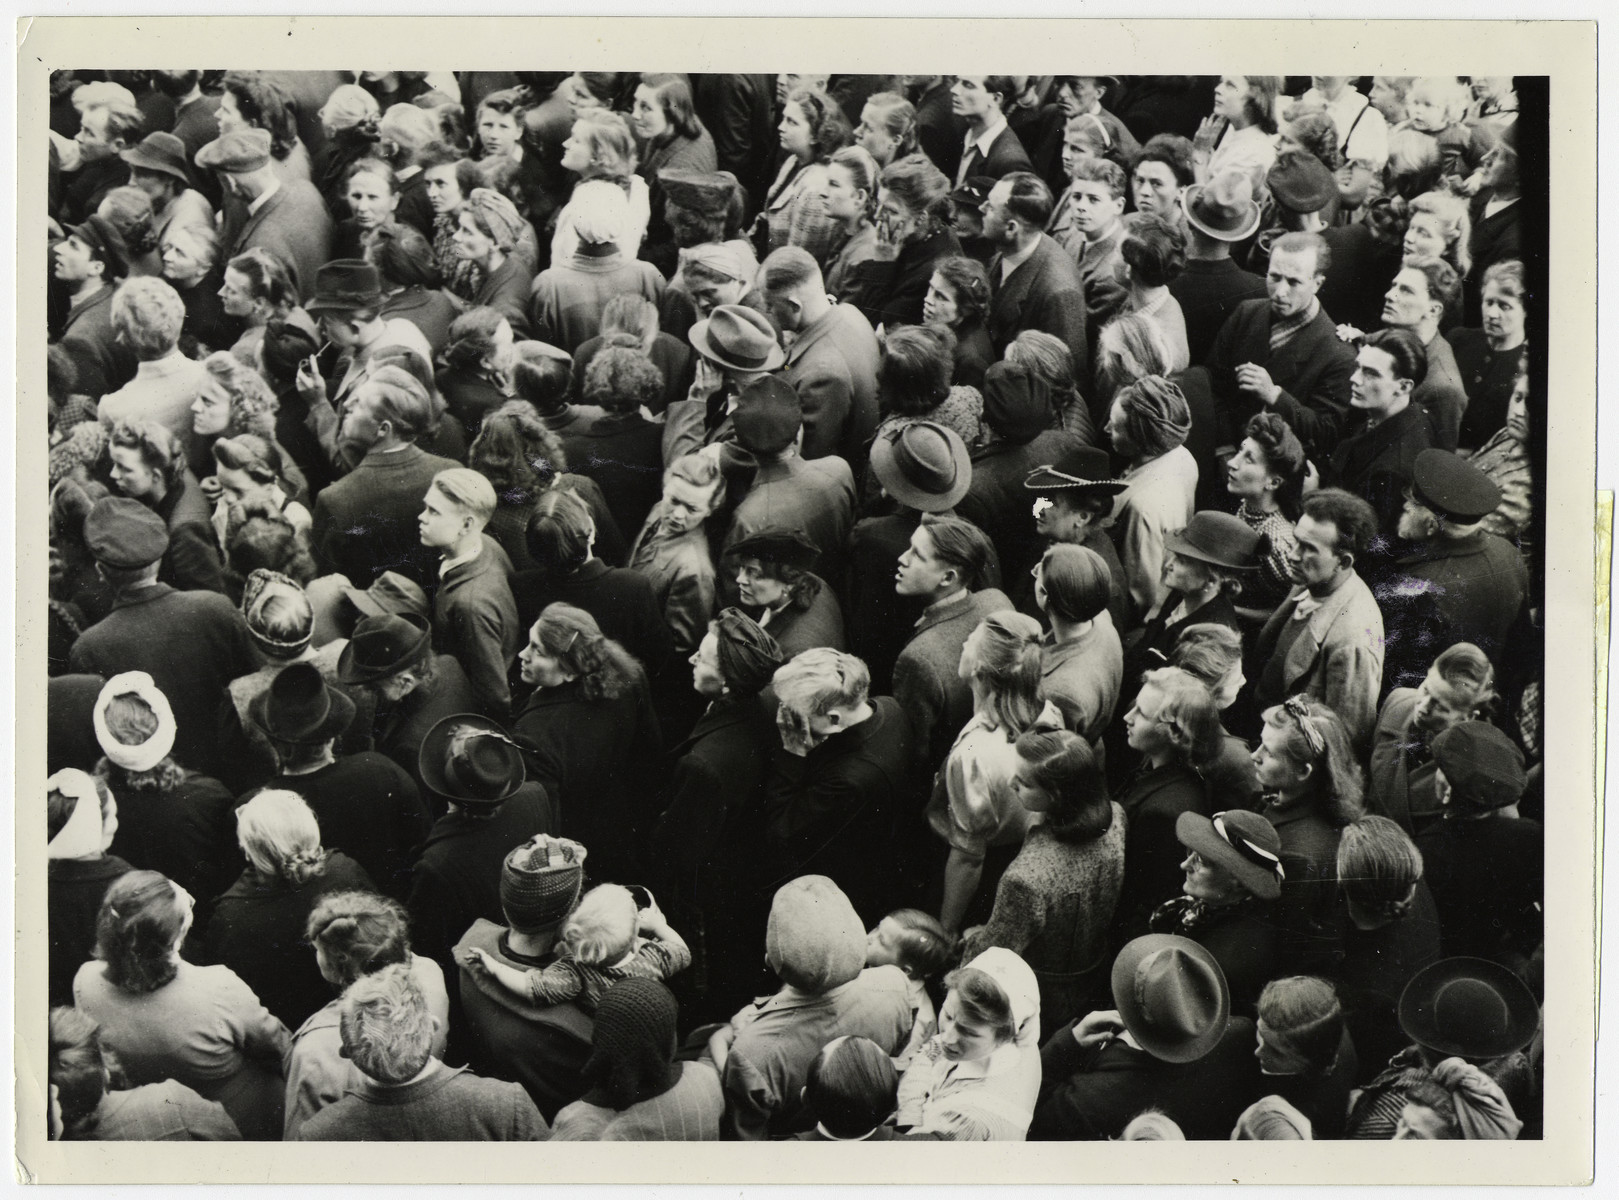 Official British photograph showing German civilians listening to the terms of German surrender. 

Original caption reads, "Thousands of German civilians gathered in the square in front of the ancient Town Hall at Lueneburg to hear the official news of the surrender of all the German armed forces in Europe. A British loud speaker van was used to relay the news in German.  An old woman in centre of crowded square weeps as she hears the news."